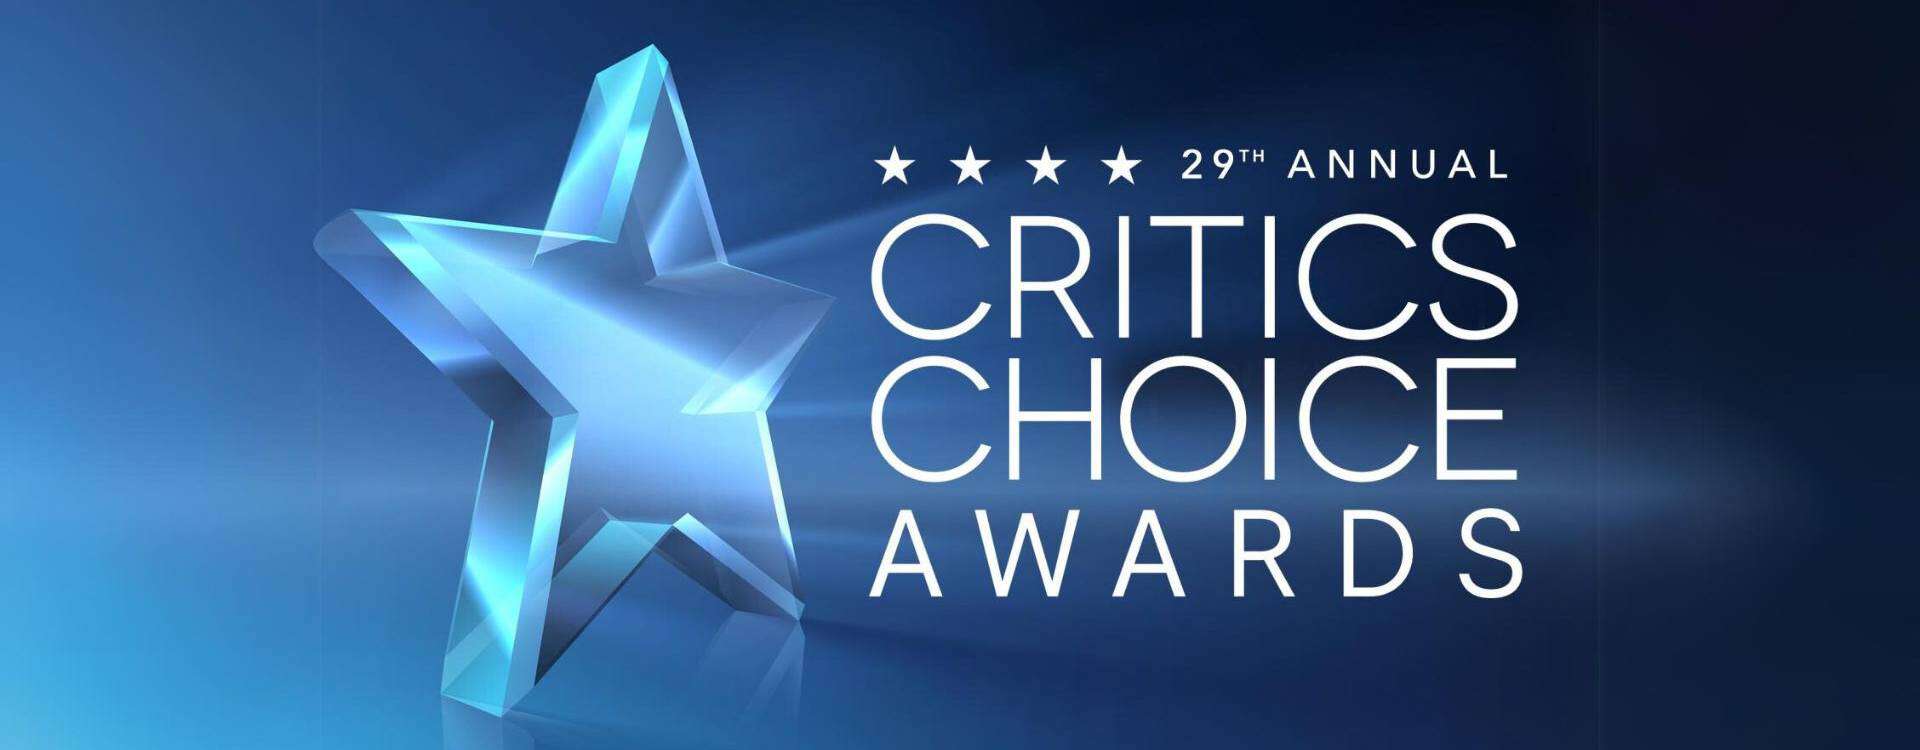 How to Watch the Critics’ Choice Awards Without Cable